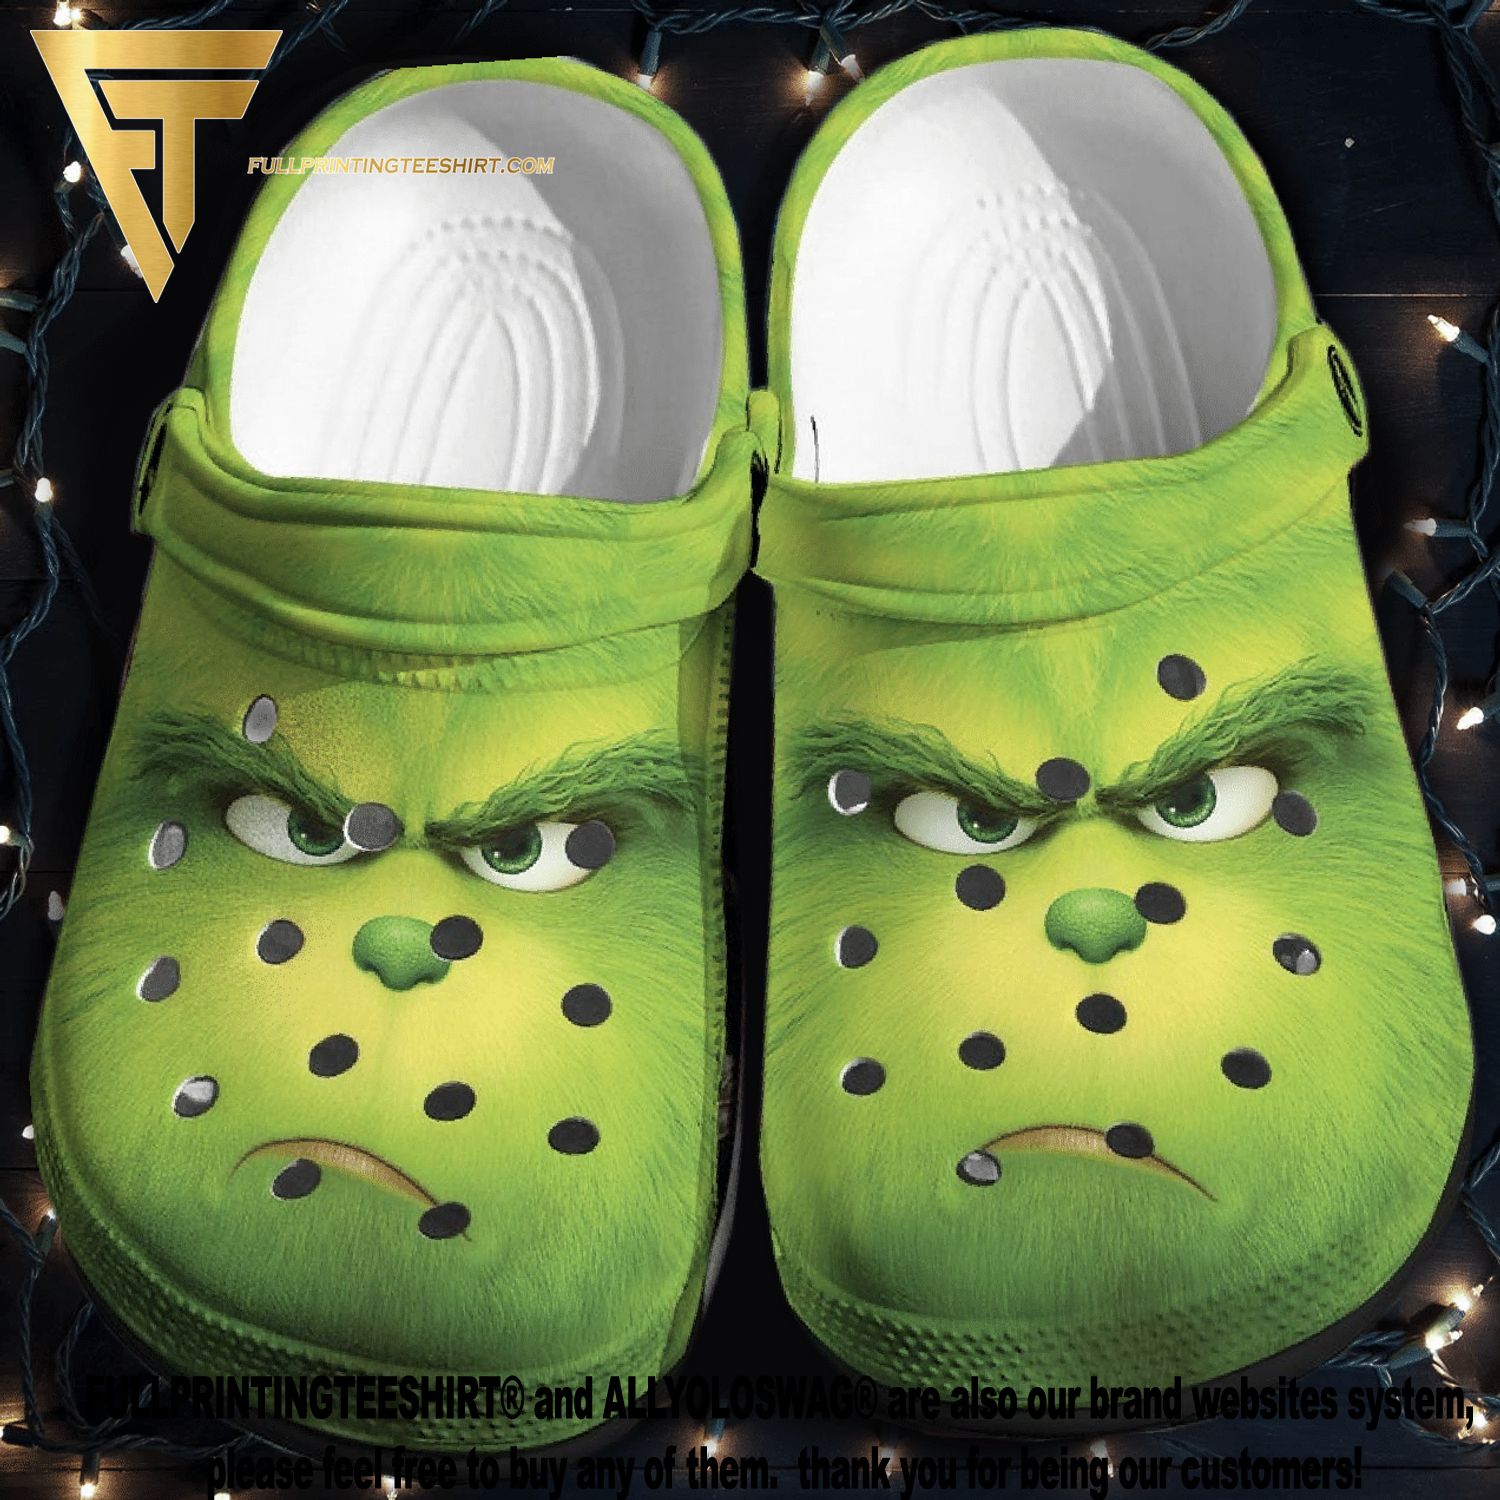 NHL New Jersey Devils Crocs Shoes - Discover Comfort And Style Clog Shoes  With Funny Crocs